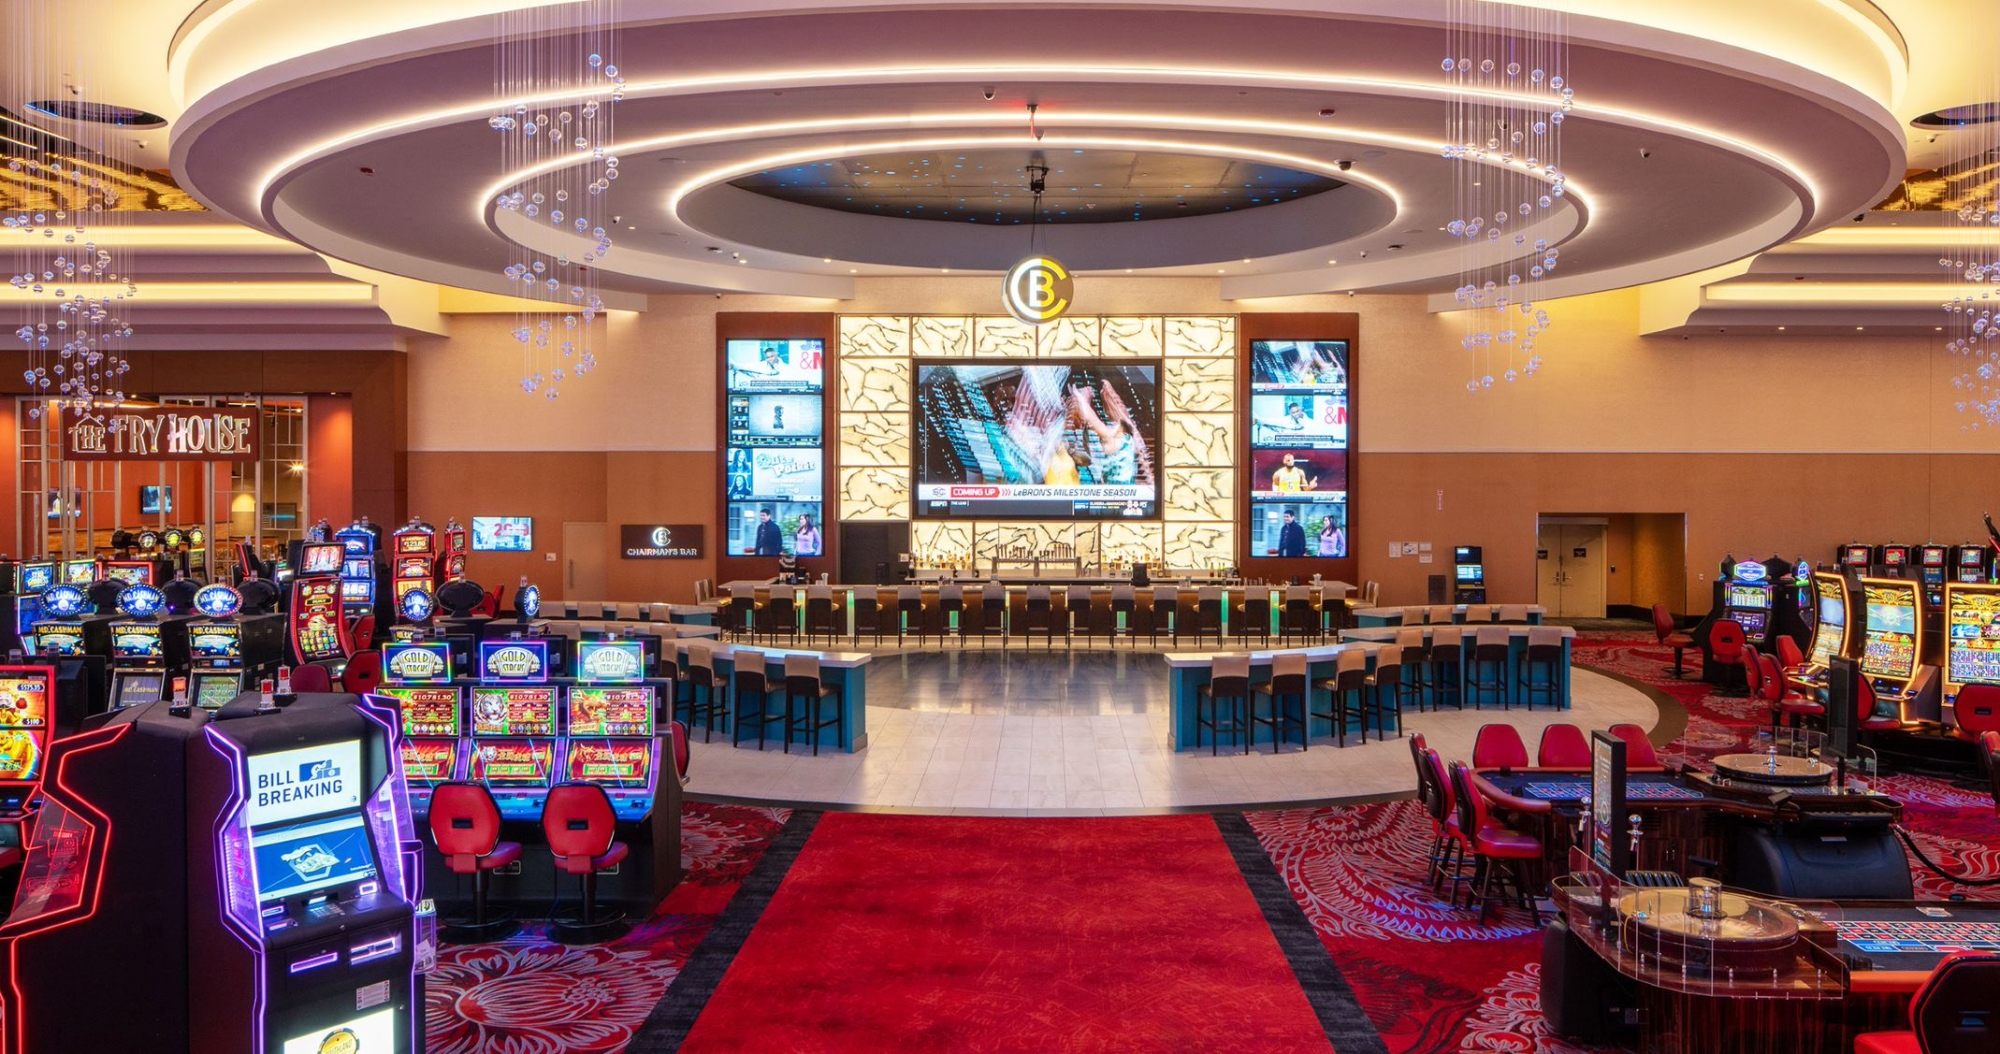 A casino floor filled with lots of slot machines and large screen televisions.